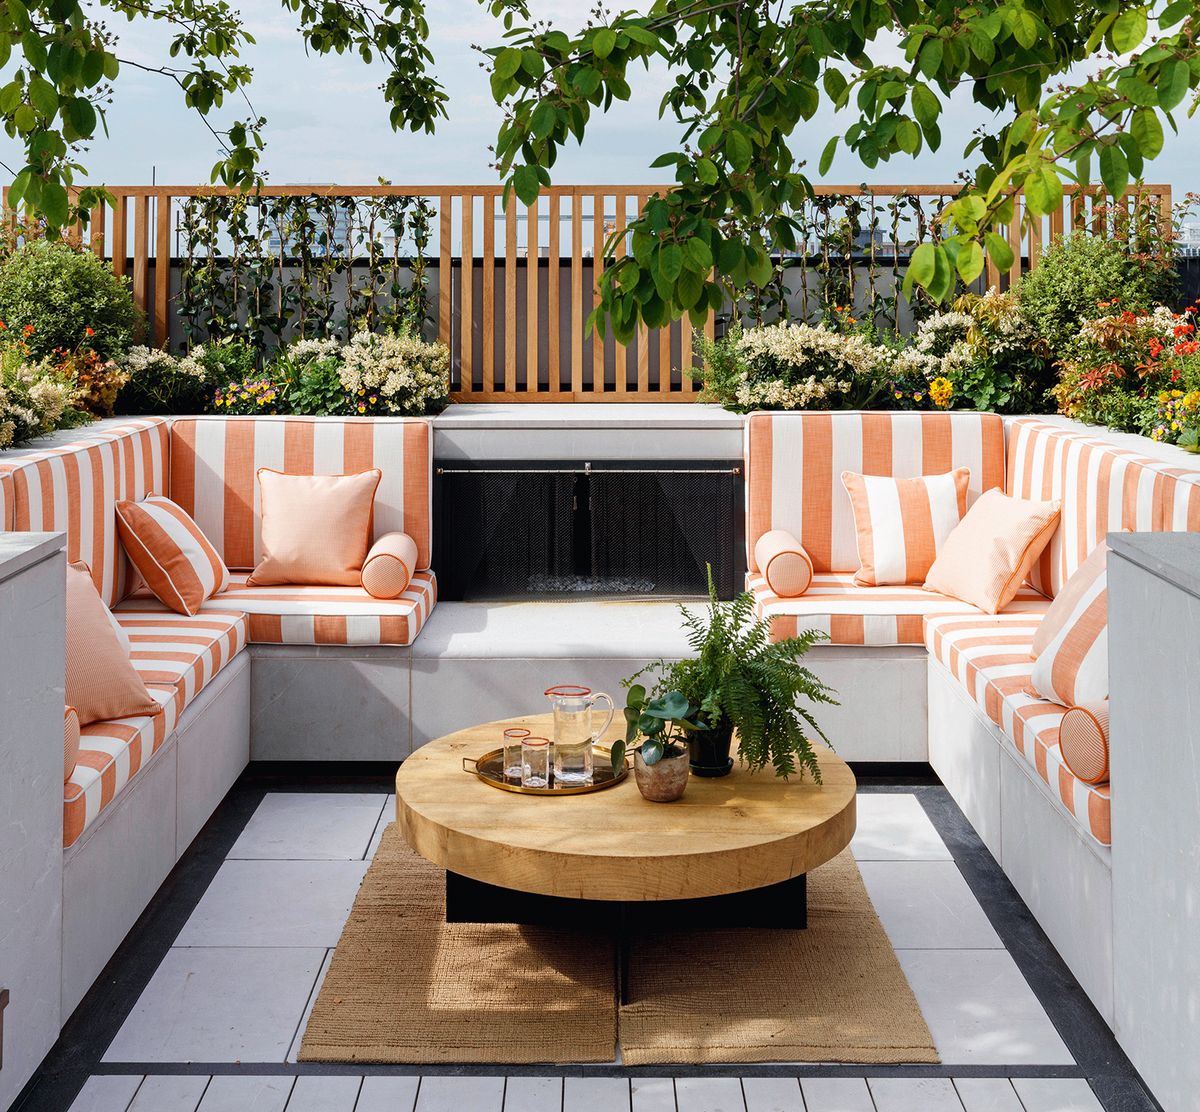 Replacing Your Outdoor Sofa Cushions is an 'Affordable Hack to a Brand-New Backyard!' — Here's Where to Buy Them trib.al/OVe00KS